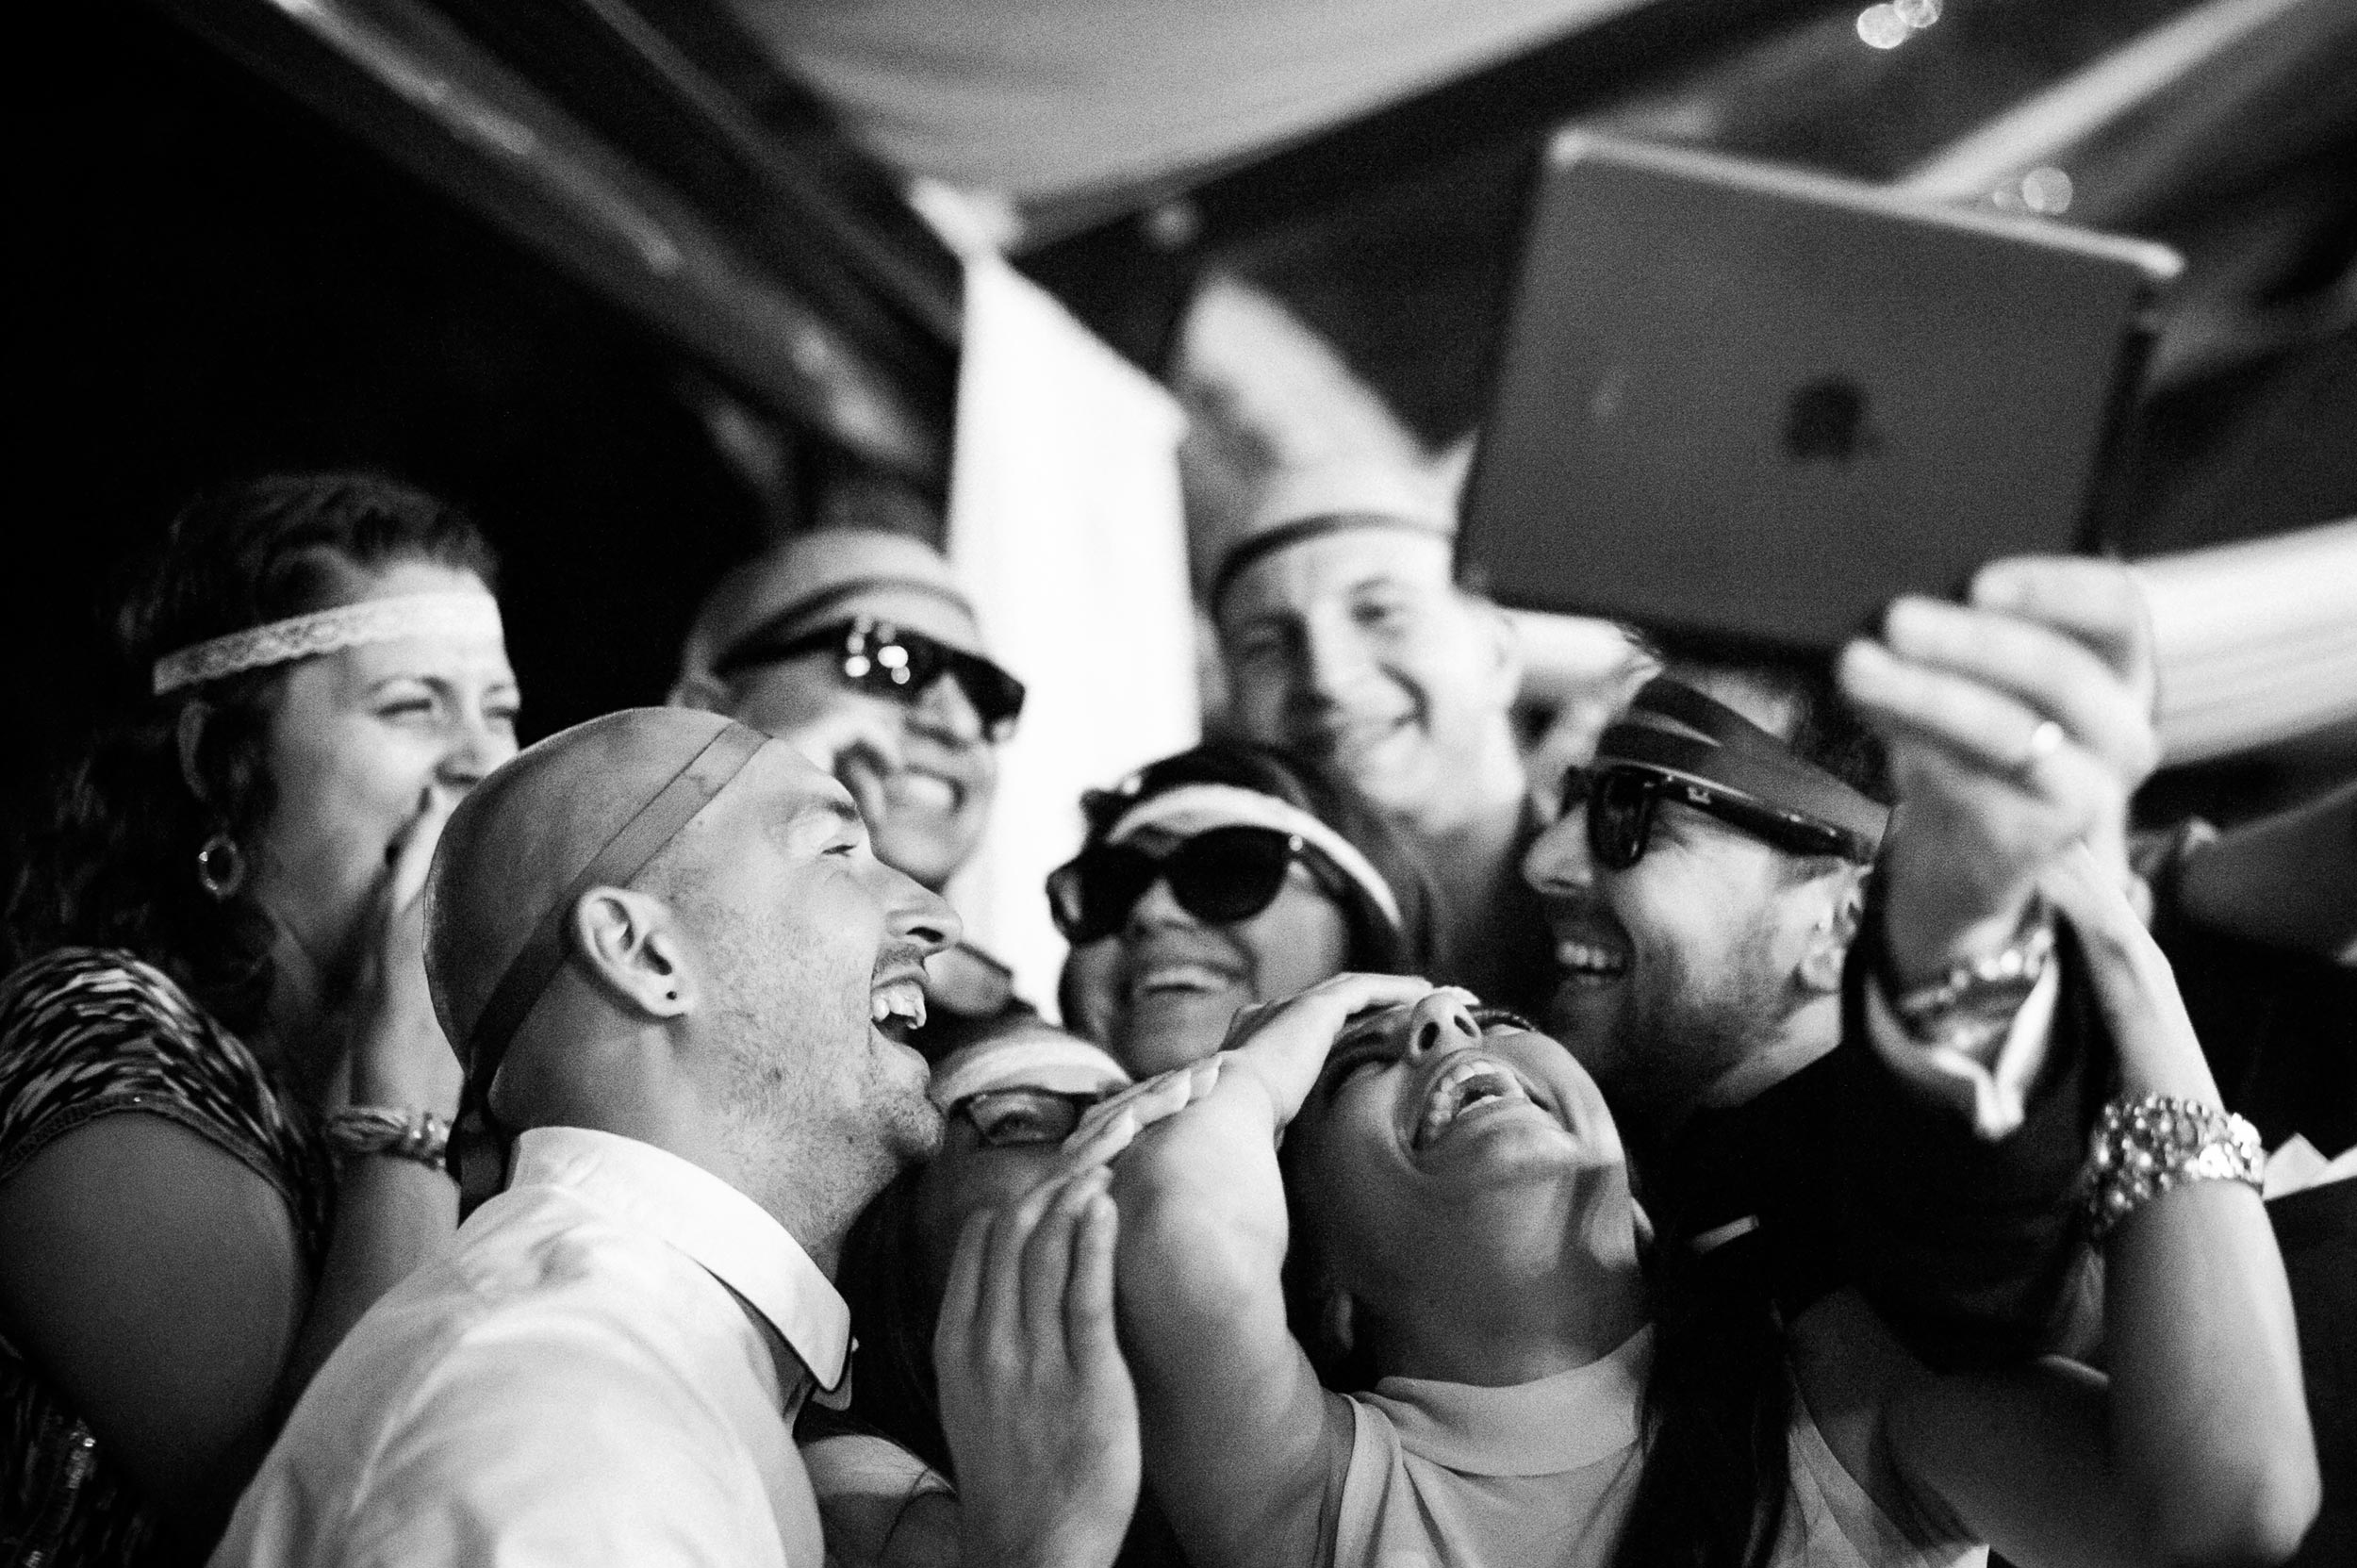 guests-having-fun-with-selfies-at-wedding-reception-in-rome-italy-black-and-white-wedding-photography.jpg